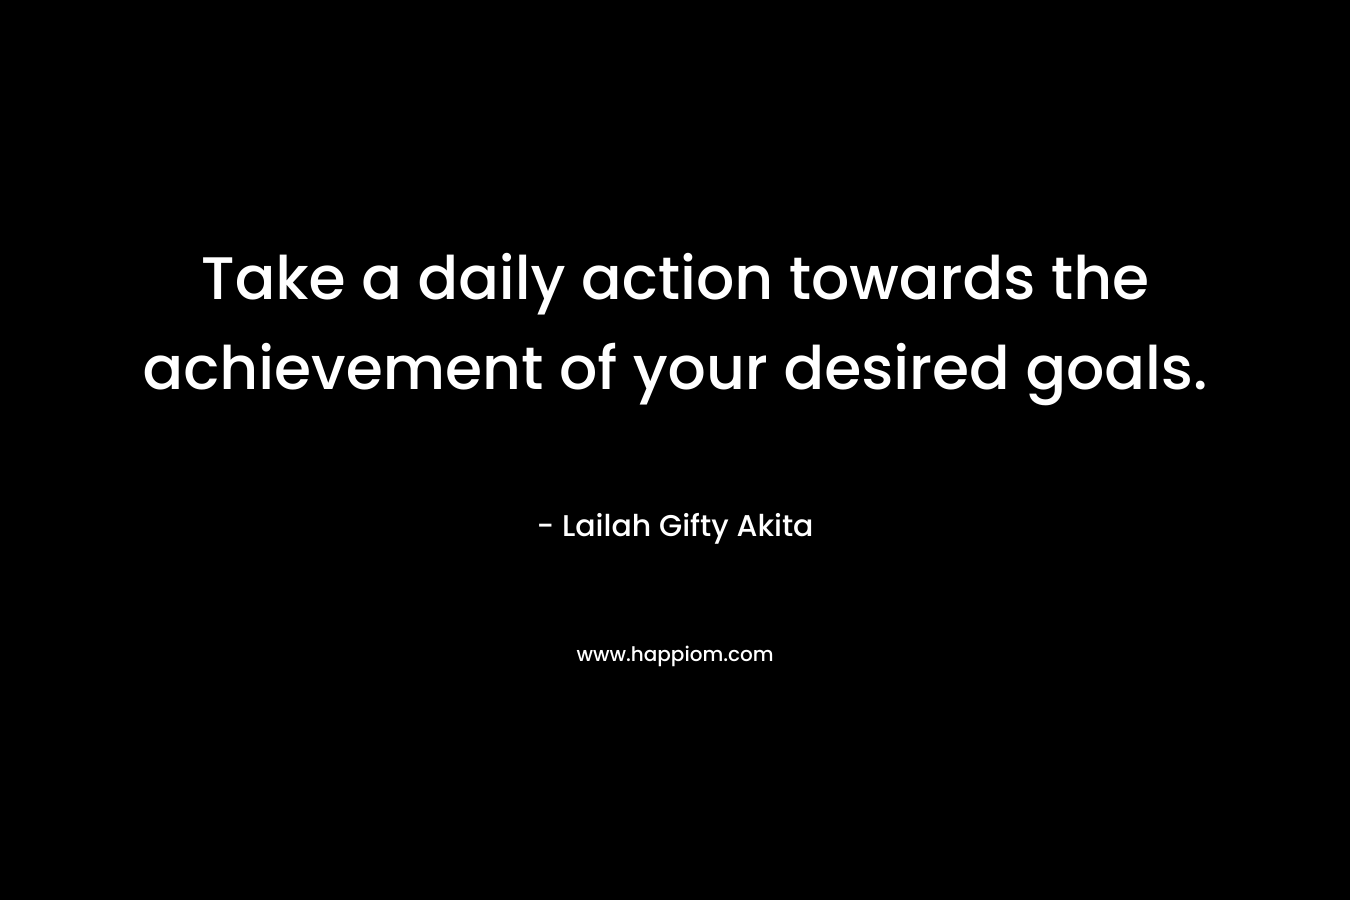 Take a daily action towards the achievement of your desired goals. – Lailah Gifty Akita